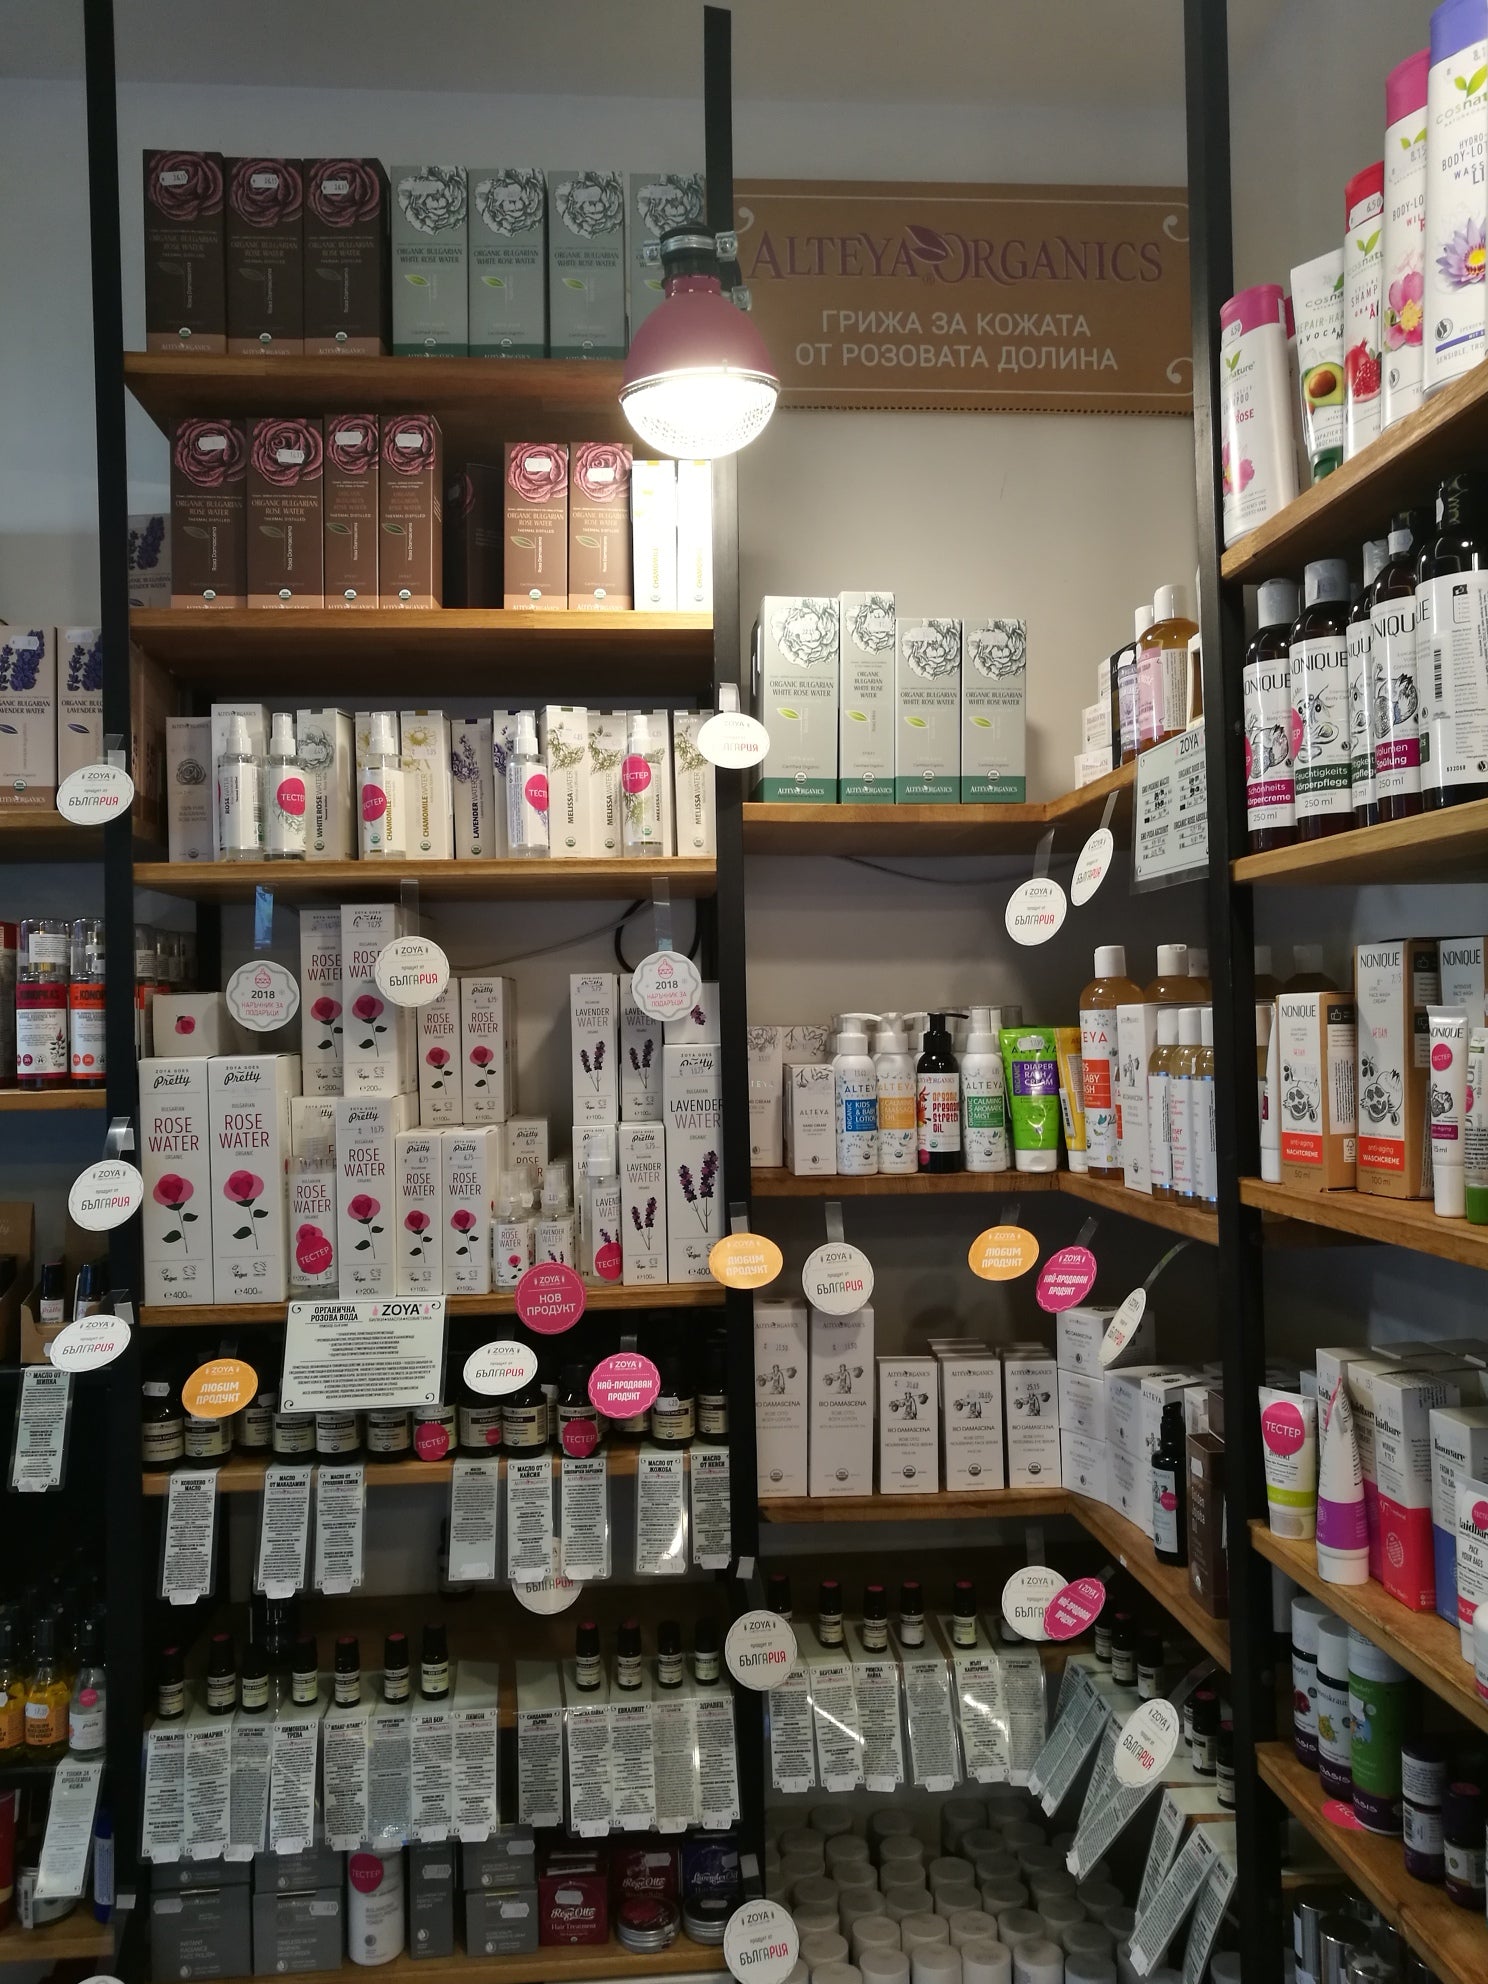 A store with shelves full of different types of products, including Bulgarian rose products.